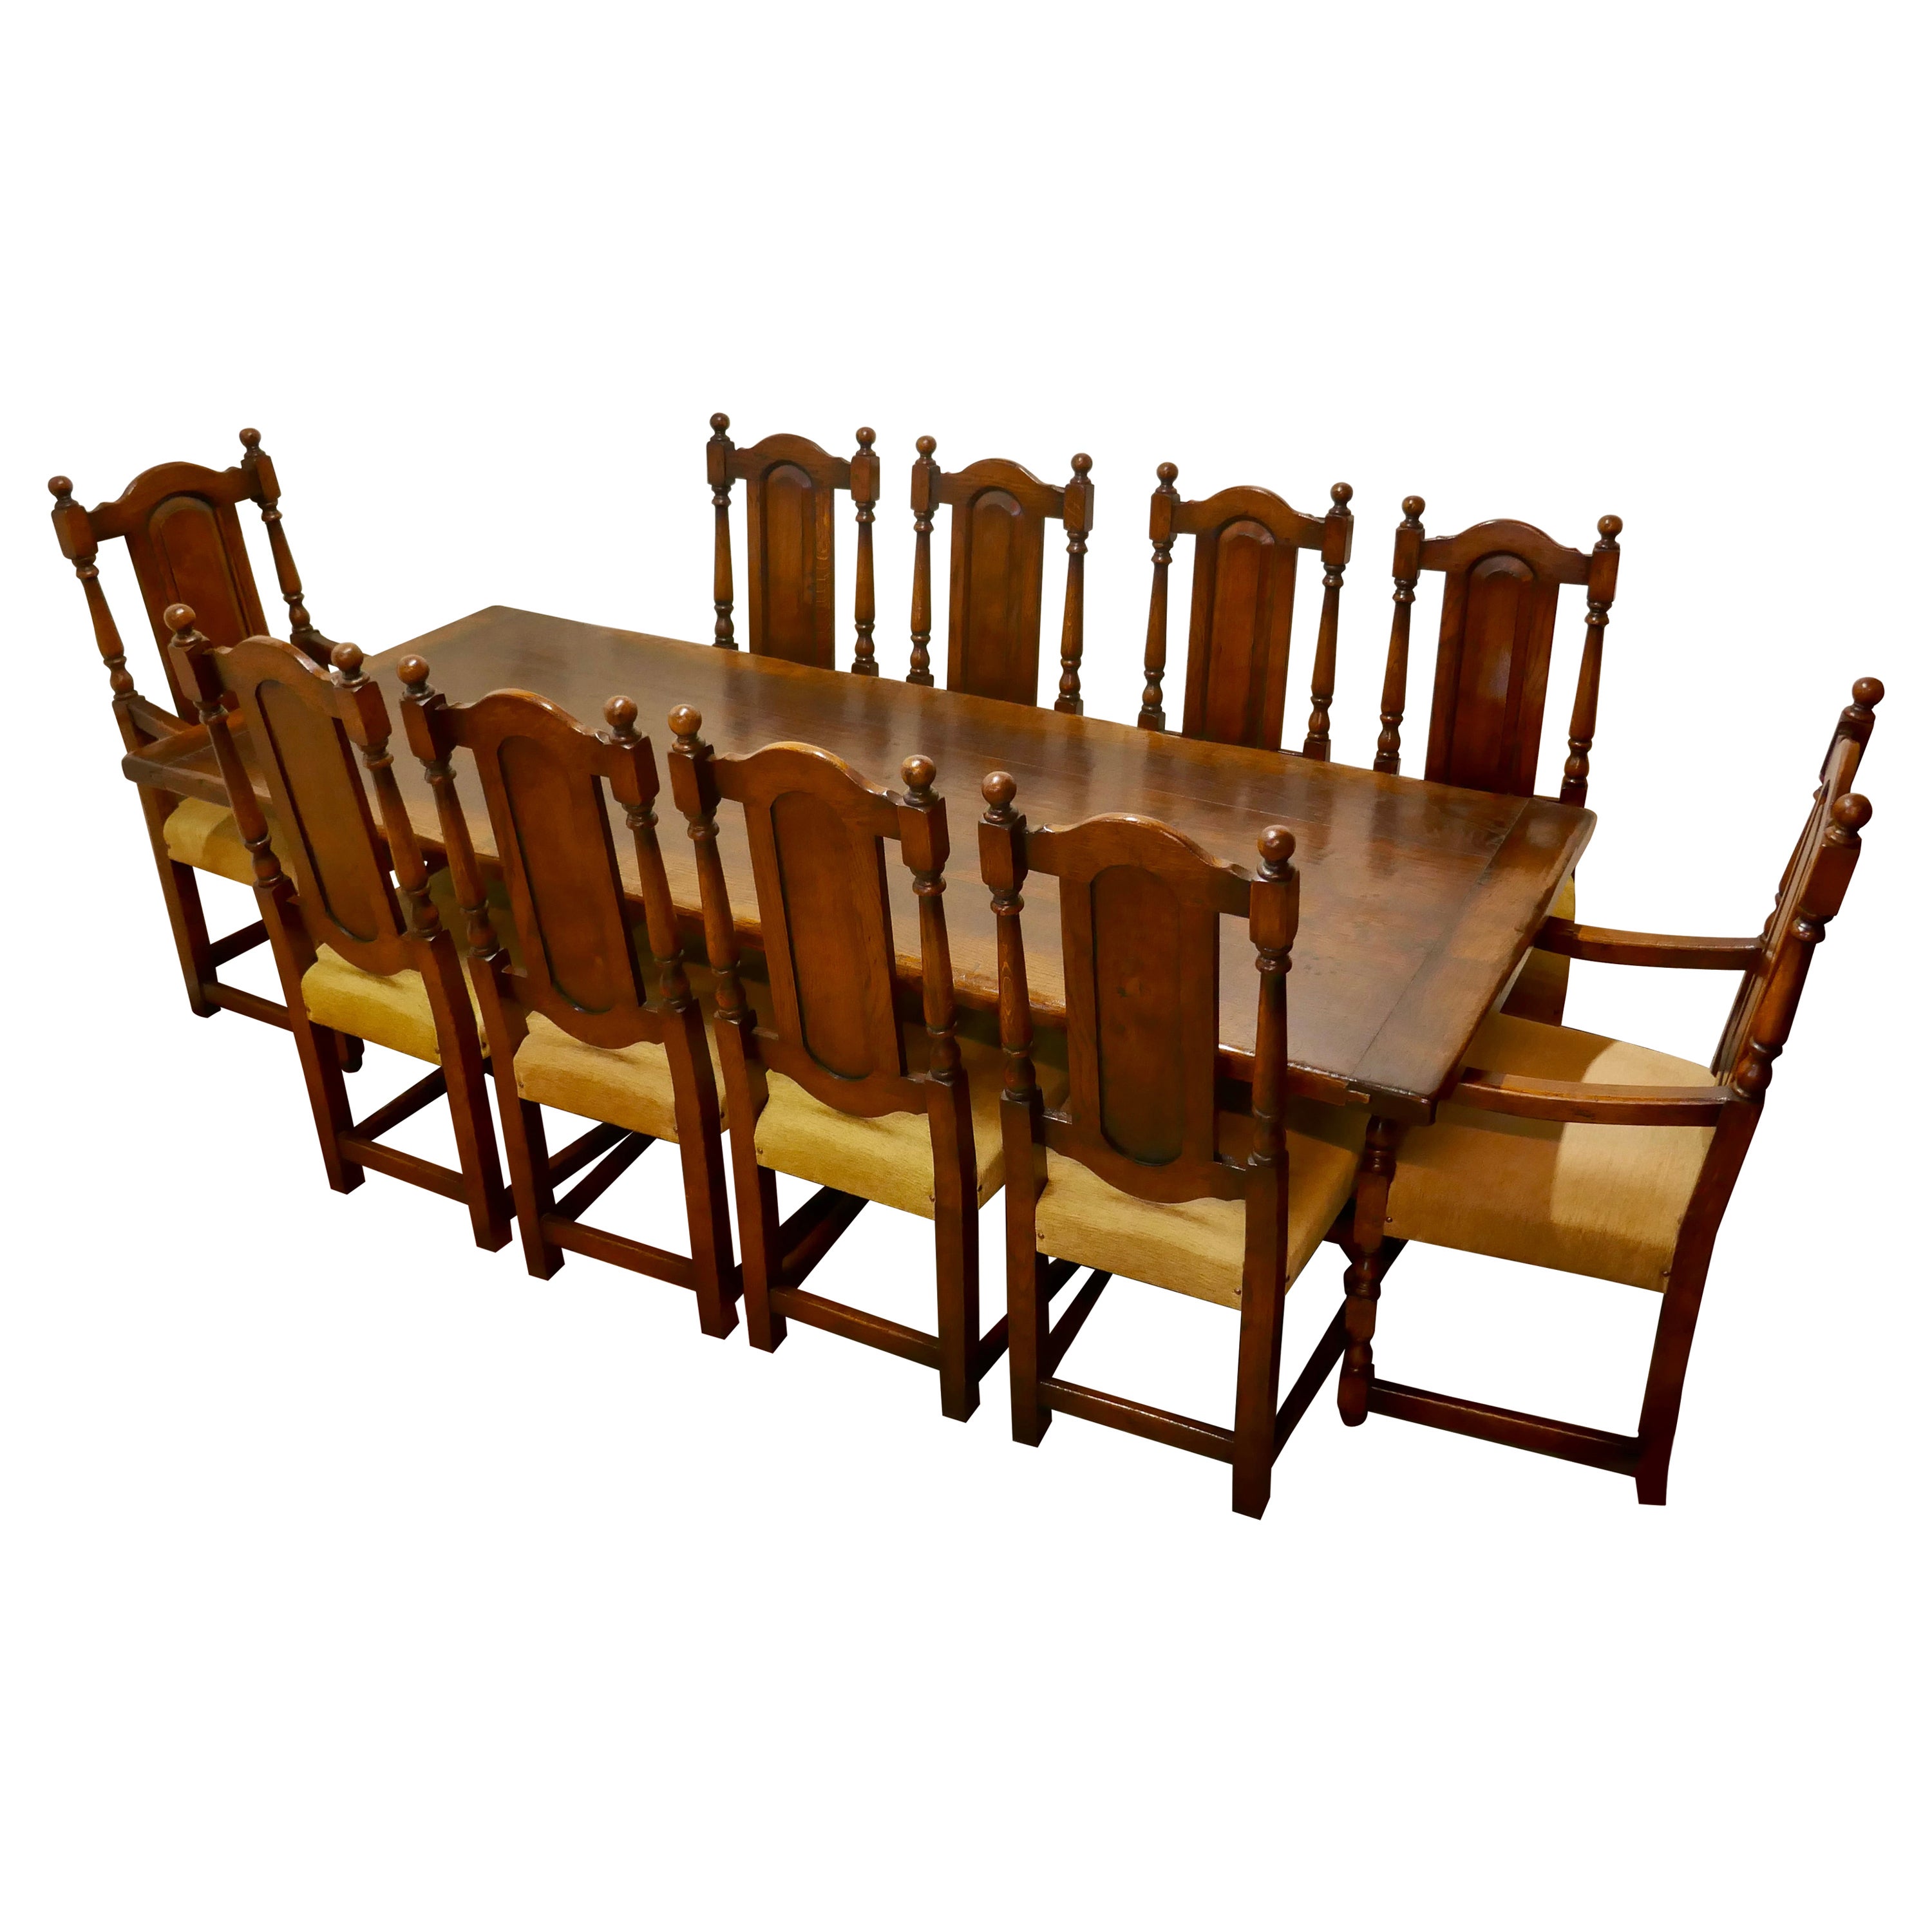 Superior Quality Arts & Crafts Oak Refectory Dining Table and 10 Dining Chairs